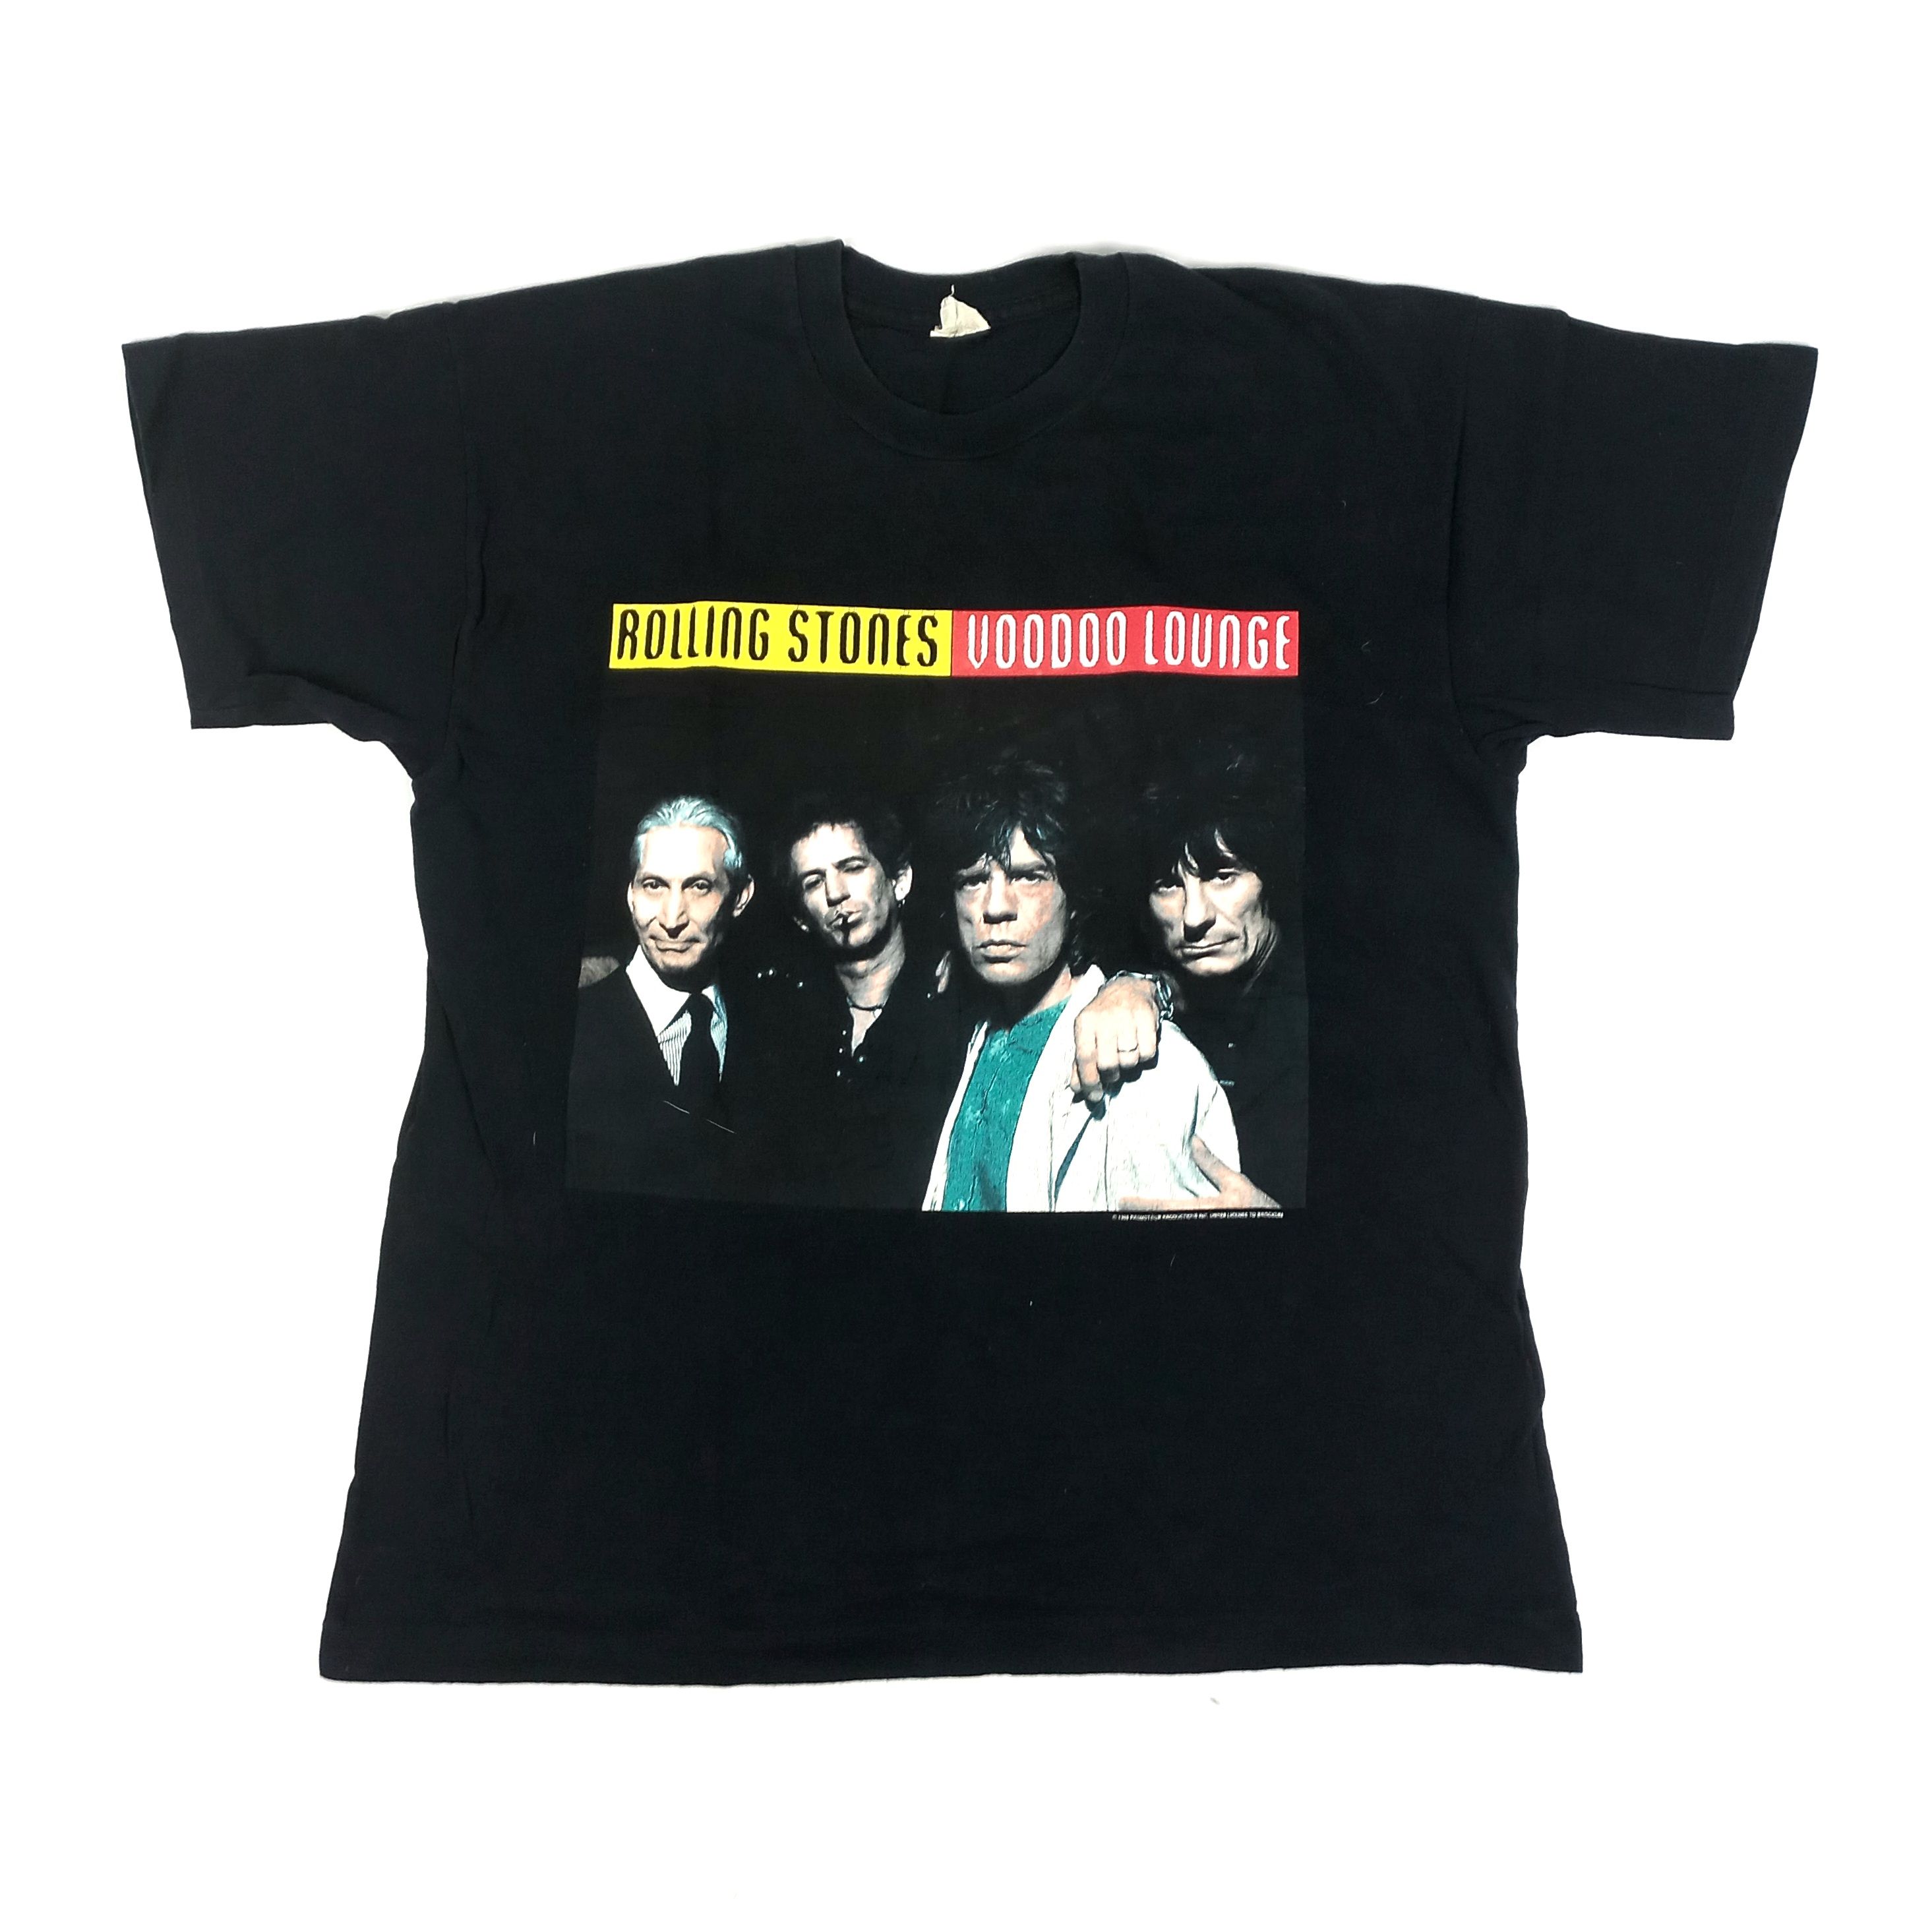 Pre-owned Band Tees X The Rolling Stones Vintage T-shirt 1995 In Black